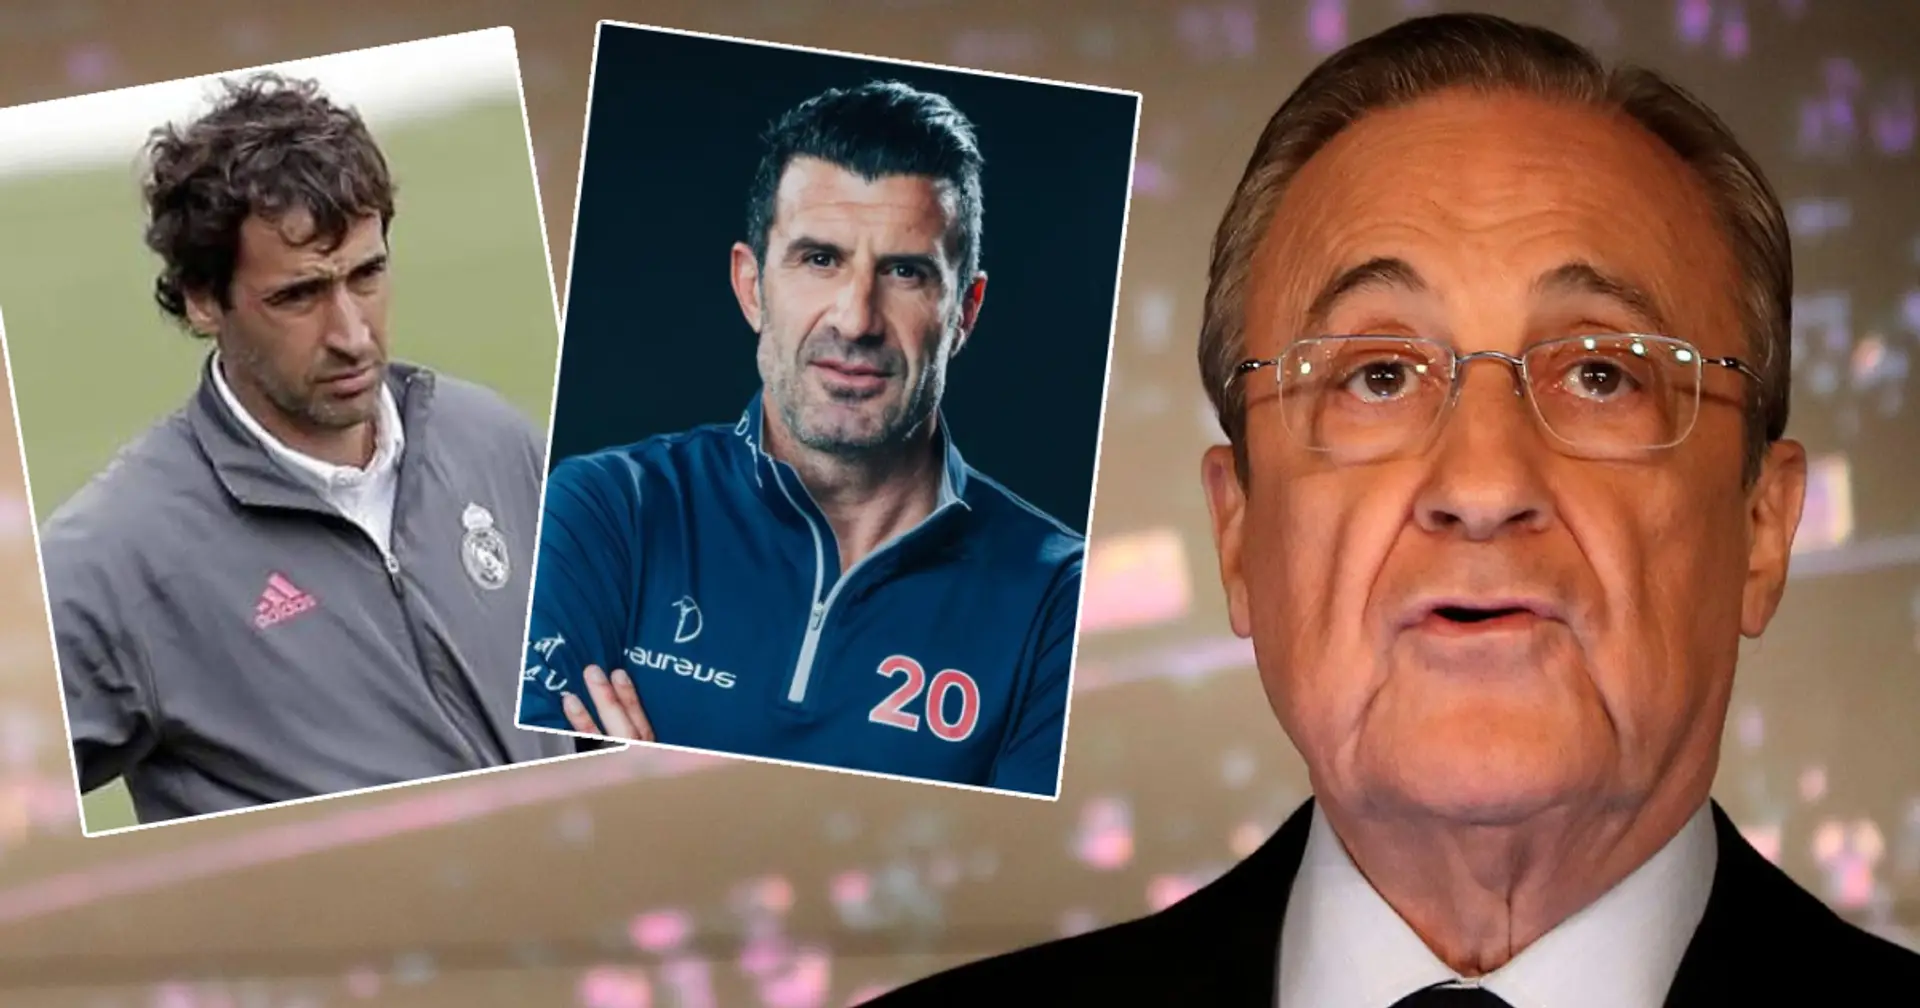 'He’s been a son of a b******': Florentino Perez on Figo and Raul in leaked audio